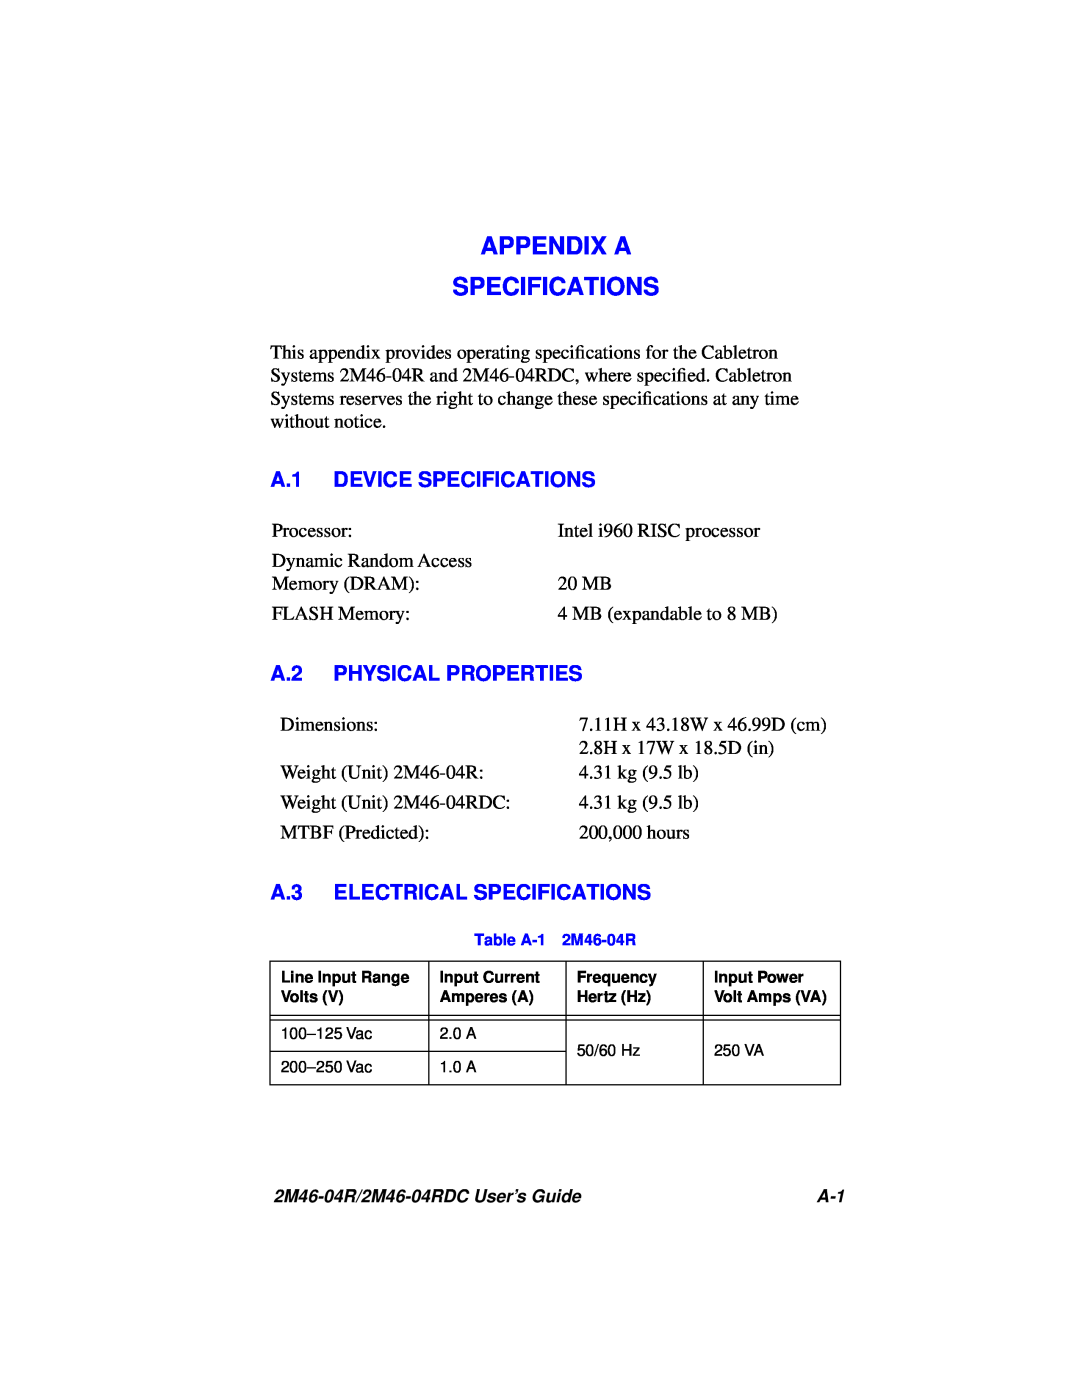 Cabletron Systems pmn manual Appendix A Specifications, A.1 DEVICE SPECIFICATIONS, A.2 PHYSICAL PROPERTIES 